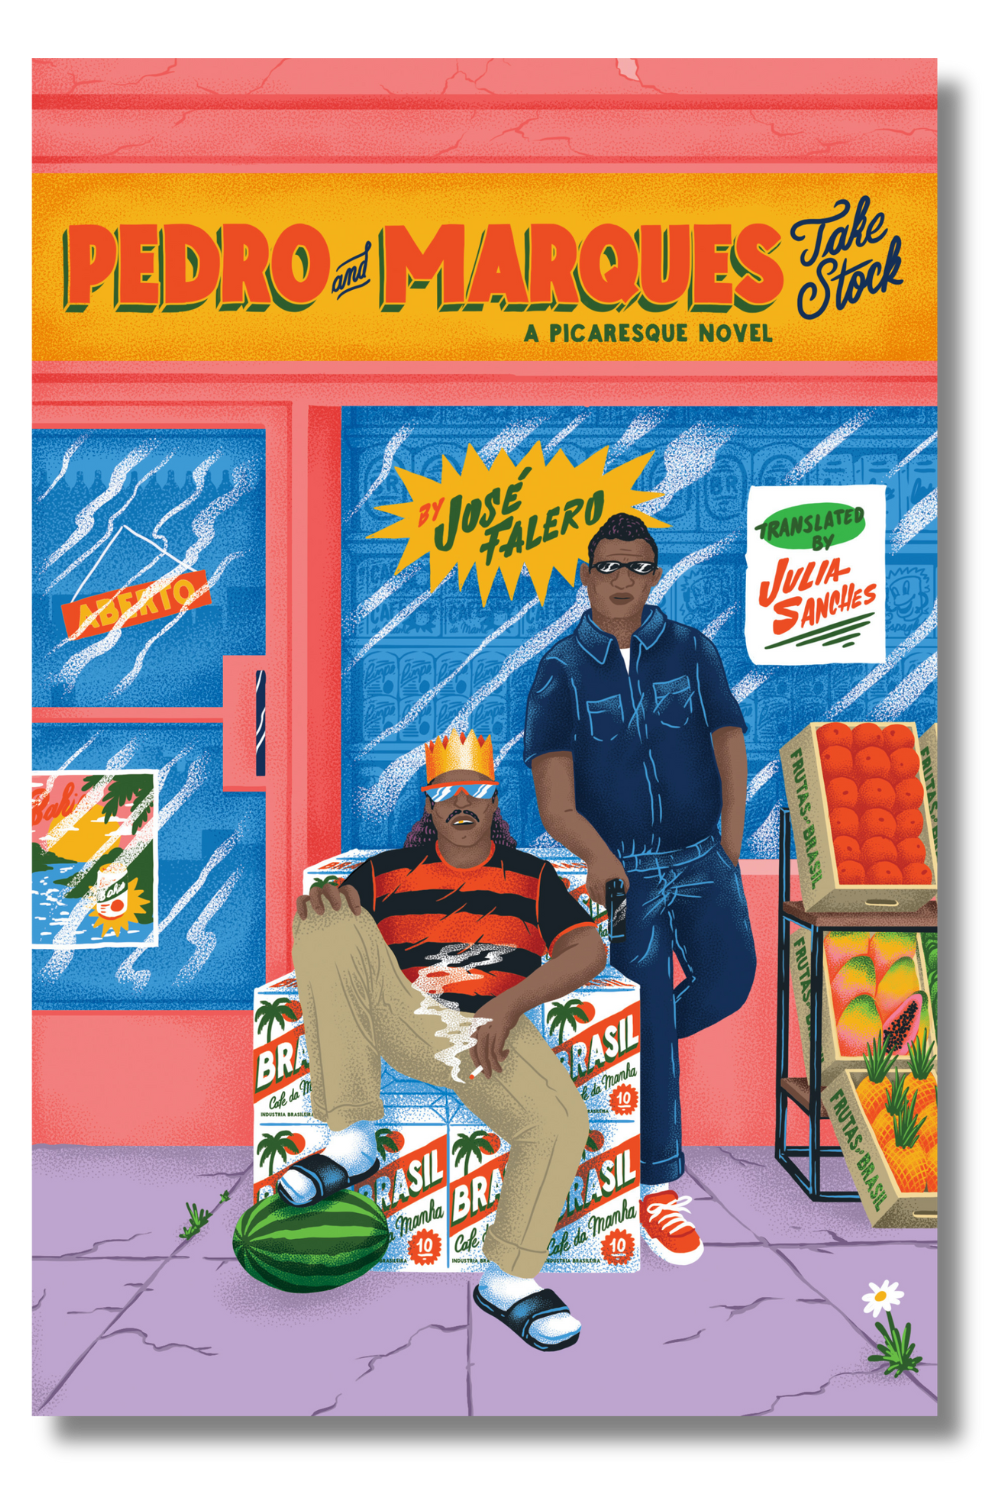 The cover of "Pedro and Marques Take Stock" by José Falero, tr. by Julia Sanches